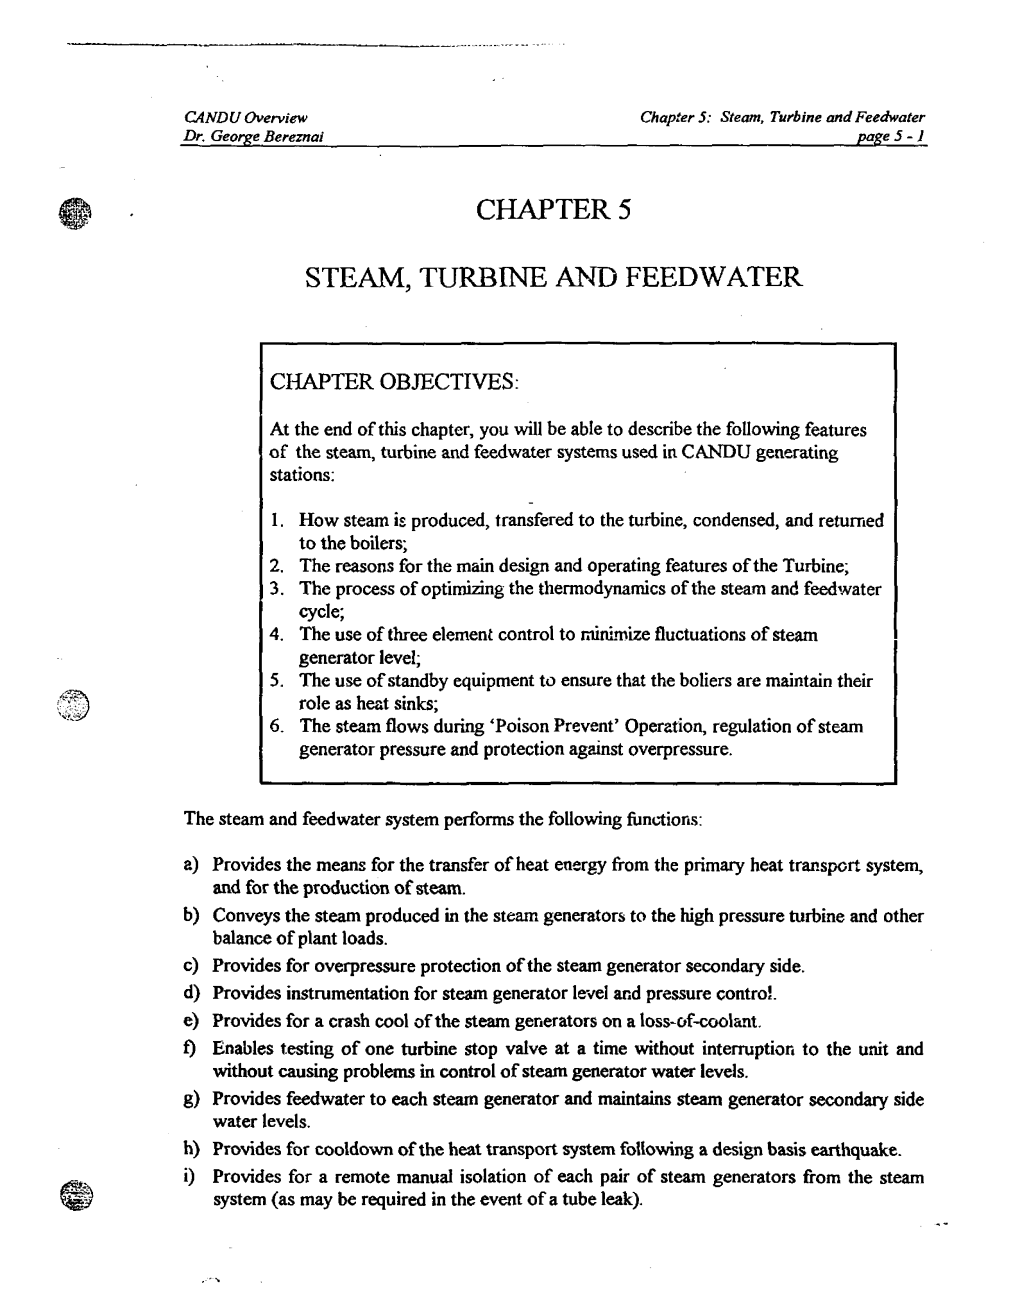 Chapter 5 Steam, Turbine and Feedwater